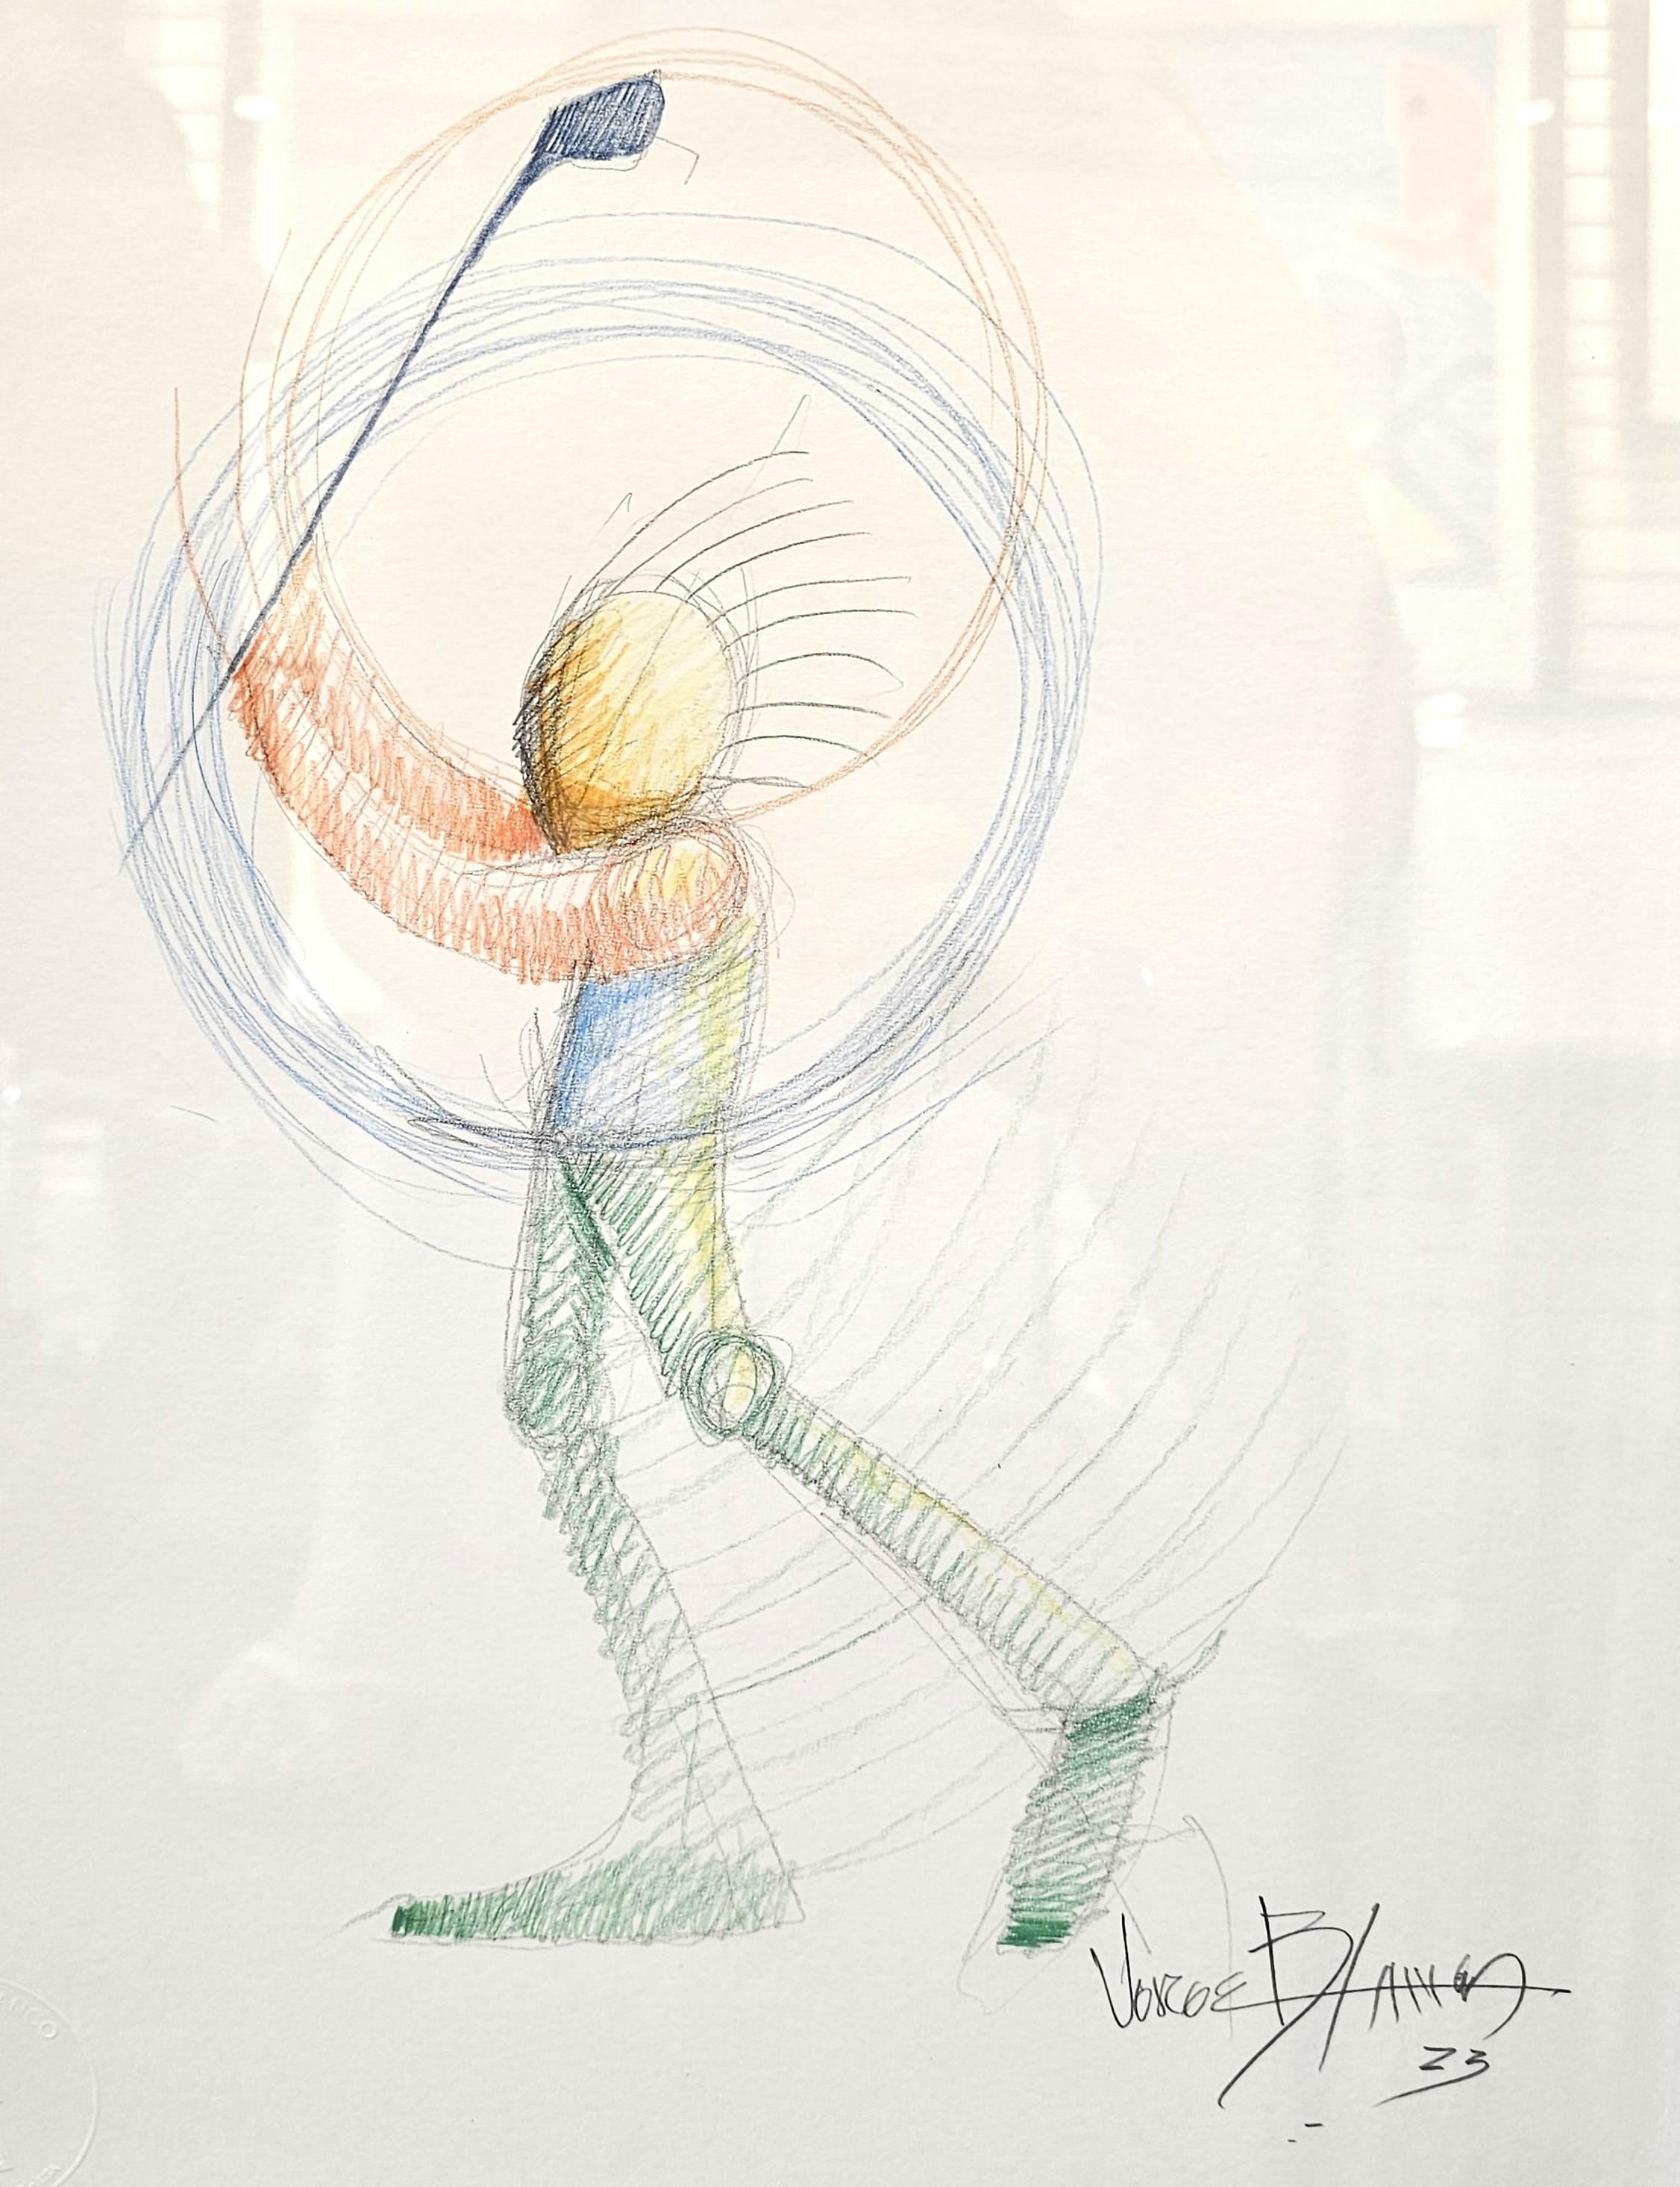 Jorge Blanco 'B1945' American, Original Graphite/Colored Pencil/Pastel. Depicting a golfer swinging his golf club. Colorful piece with graphite, green, orange, yellow, and blue colored pencil. Signed Jorge Blanco in the lower right. Dated '23 in the